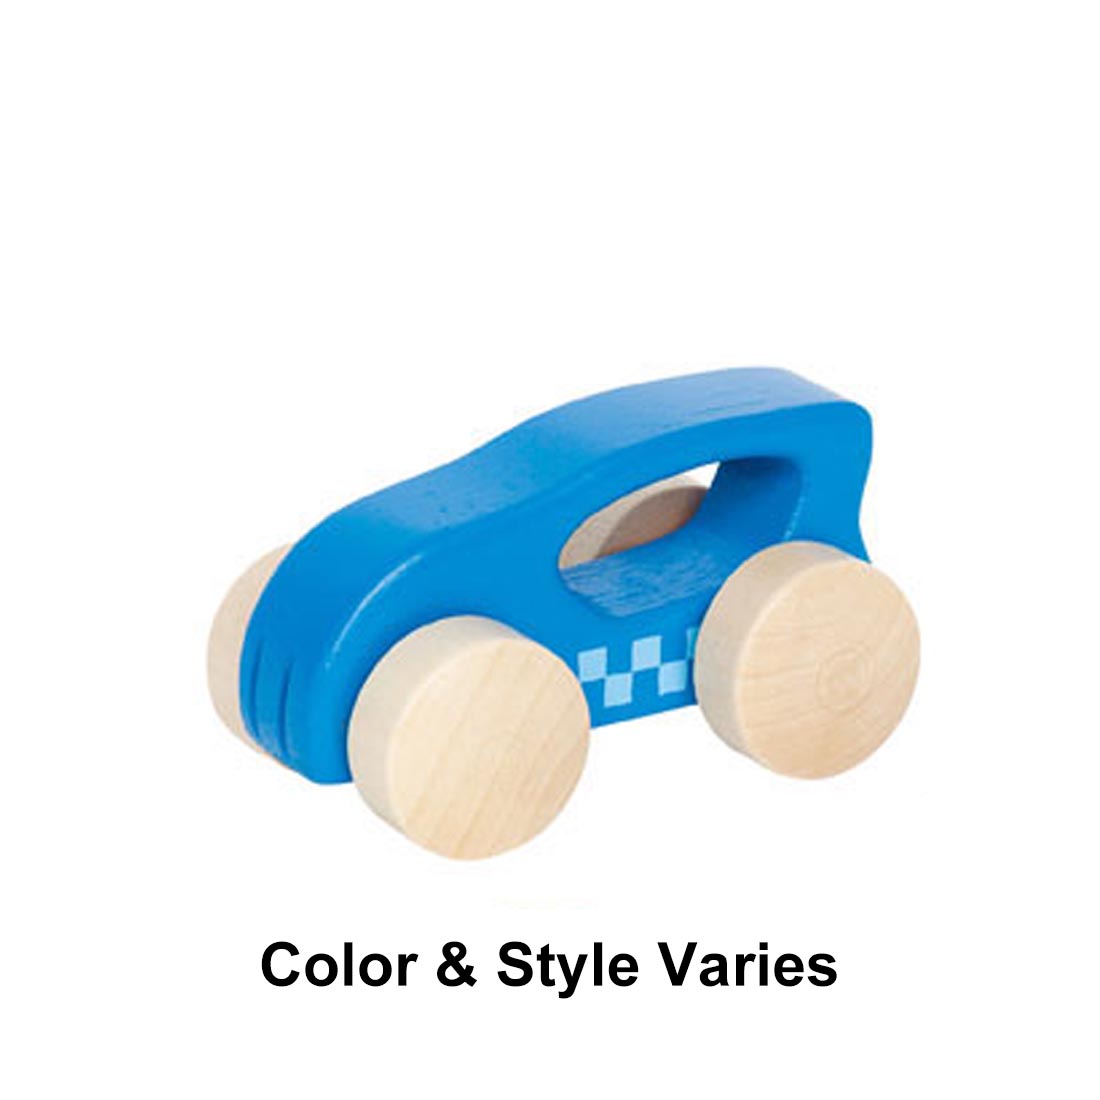 Little Auto Wooden Toy By Hape with the text Color & Style Varies